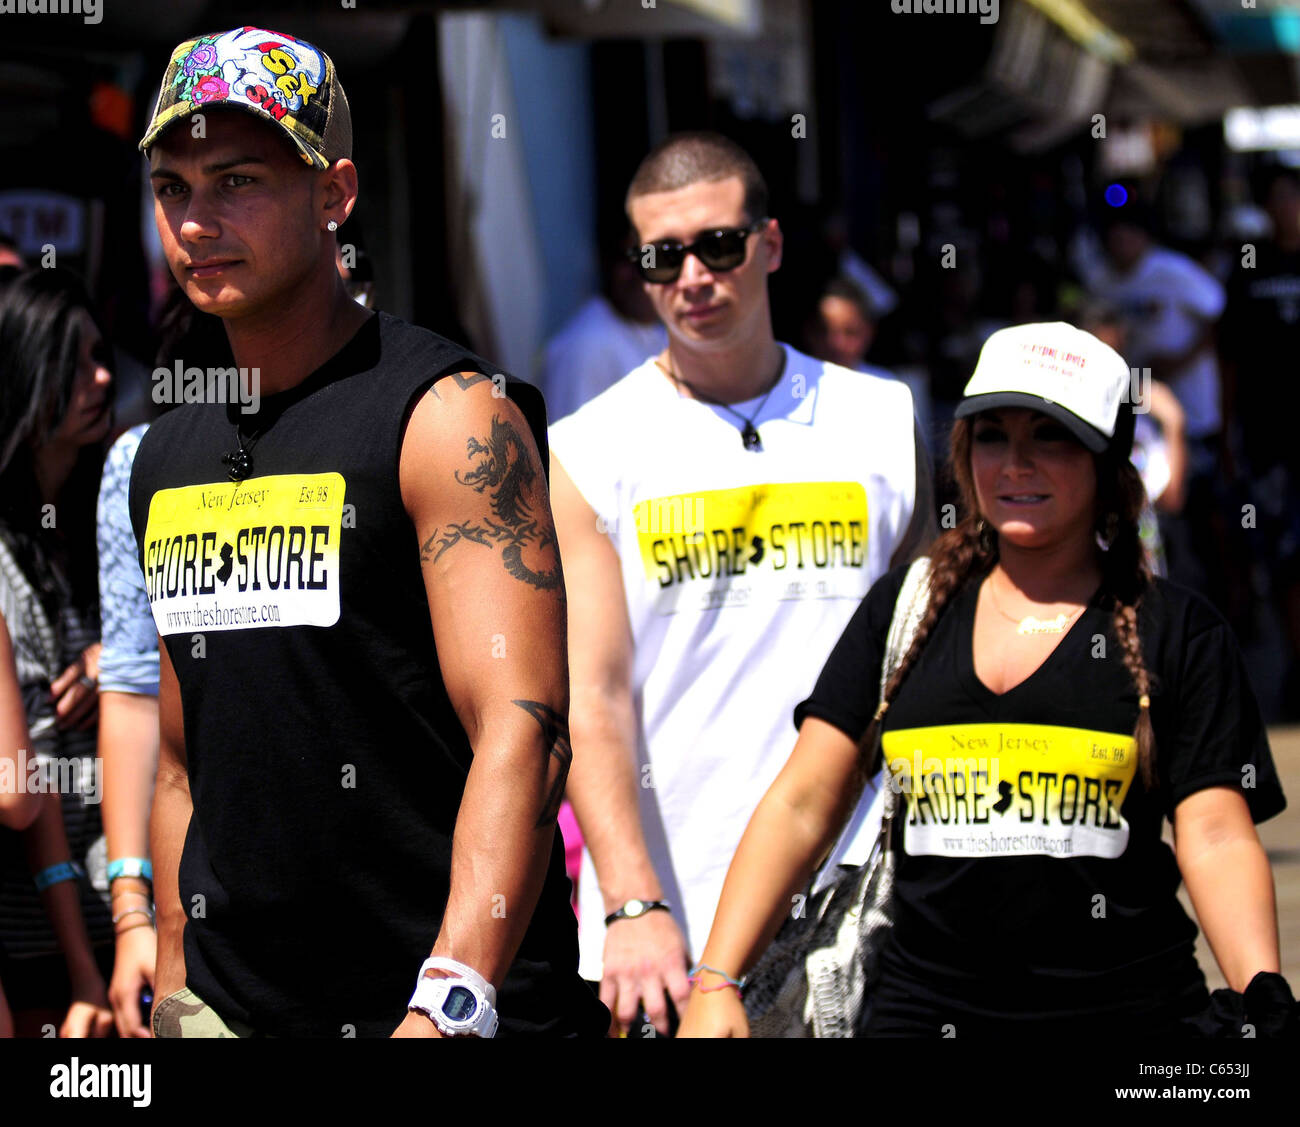 Paul DelVecchio (DJ Pauly D), Vinny Guadagnino, Deena Nicole Cortese on the boardwalk. out and about for JERSEY SHORE Season Two Celebrity Candids - FRI, , Seaside Heights, NJ August 13, 2010. Photo By: William D. Bird/Everett Collection Stock Photo